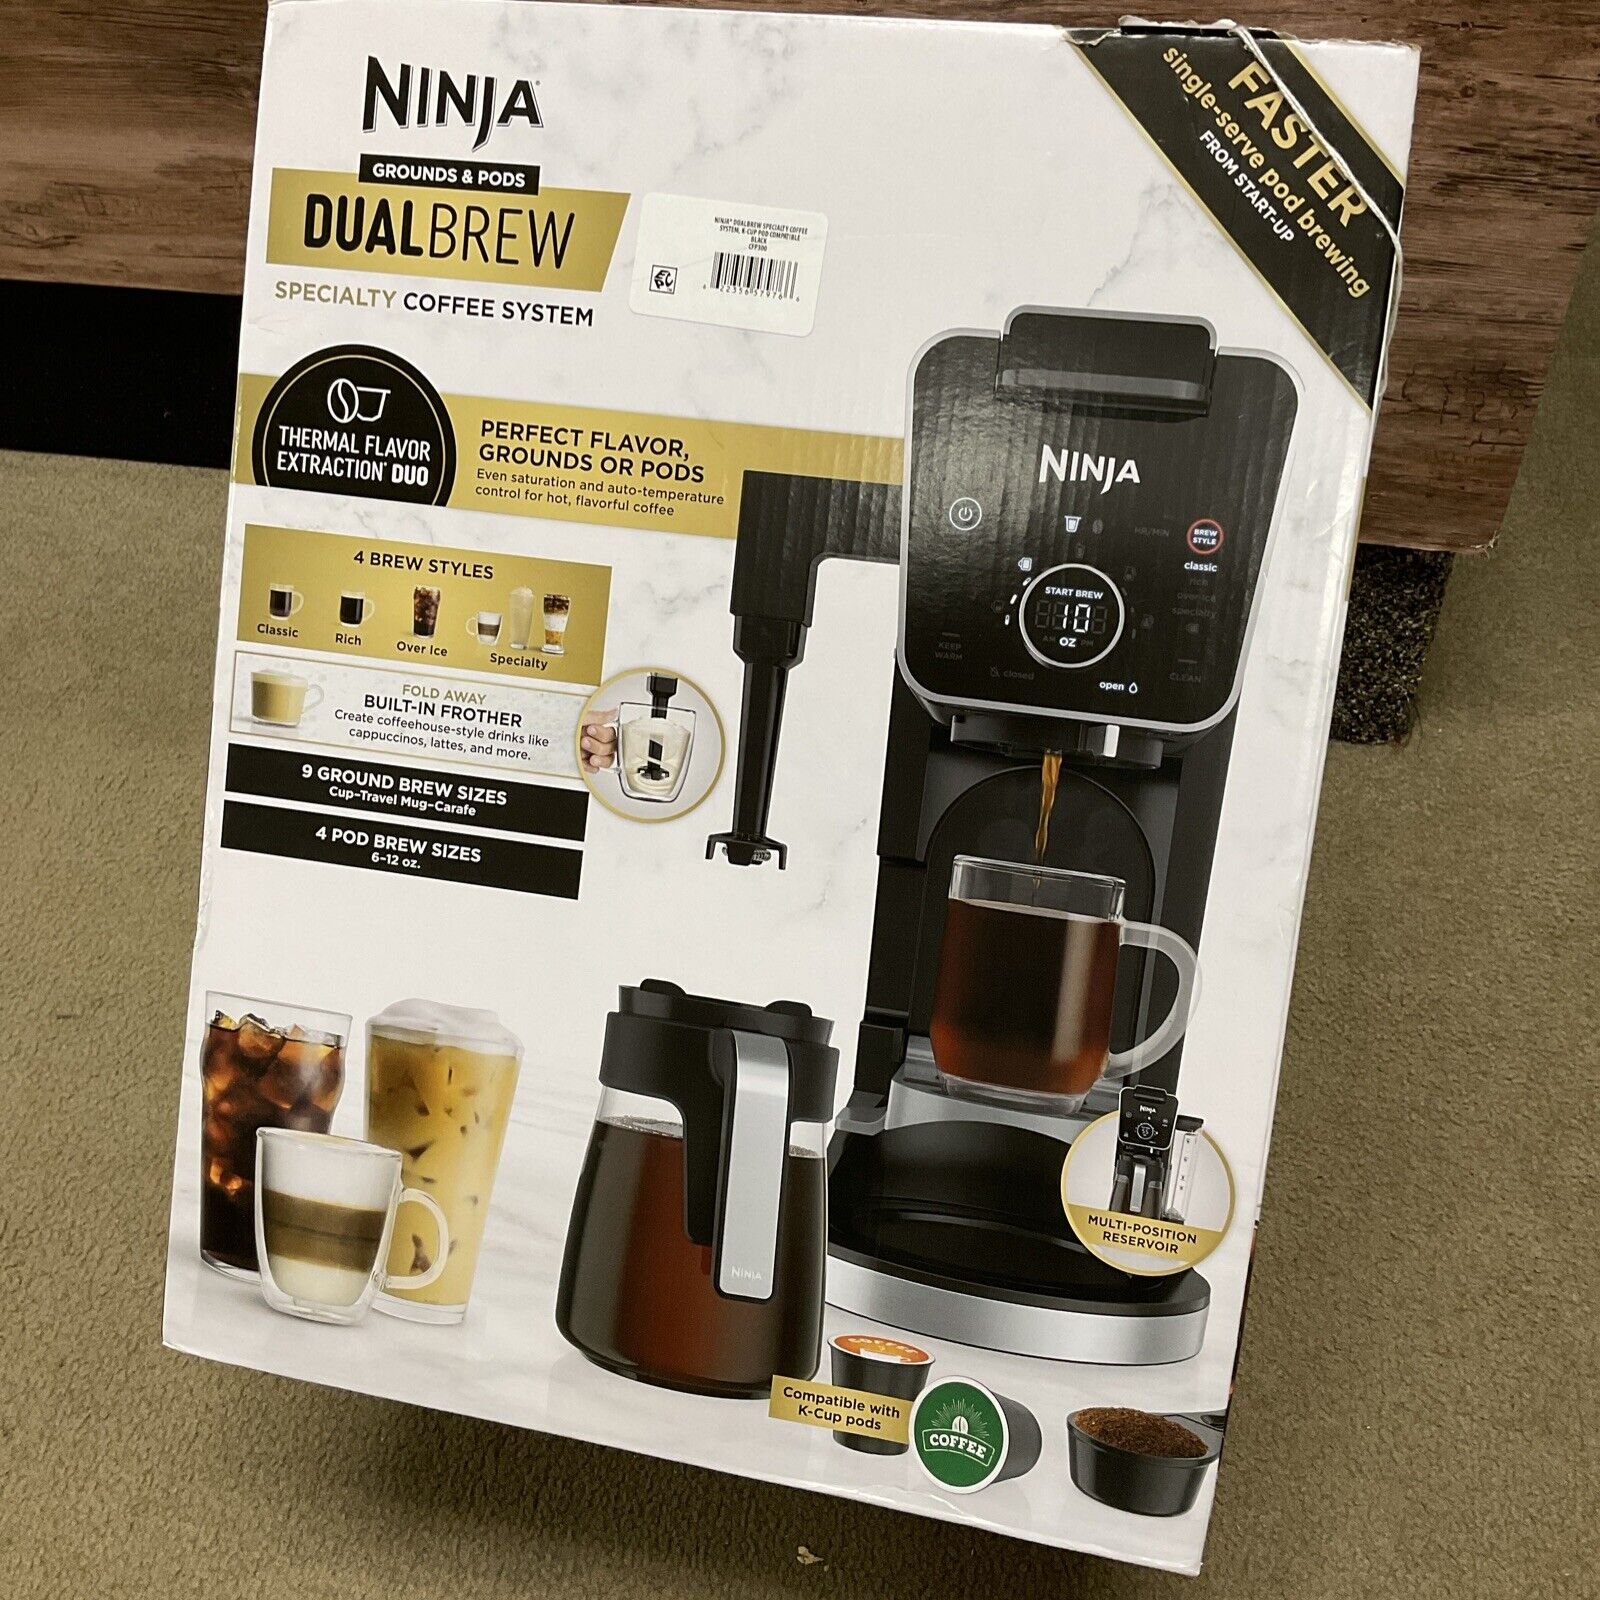 New Open Box Ninja Grounds & Pods DualBrew Specialty Coffee System CFP300 Black